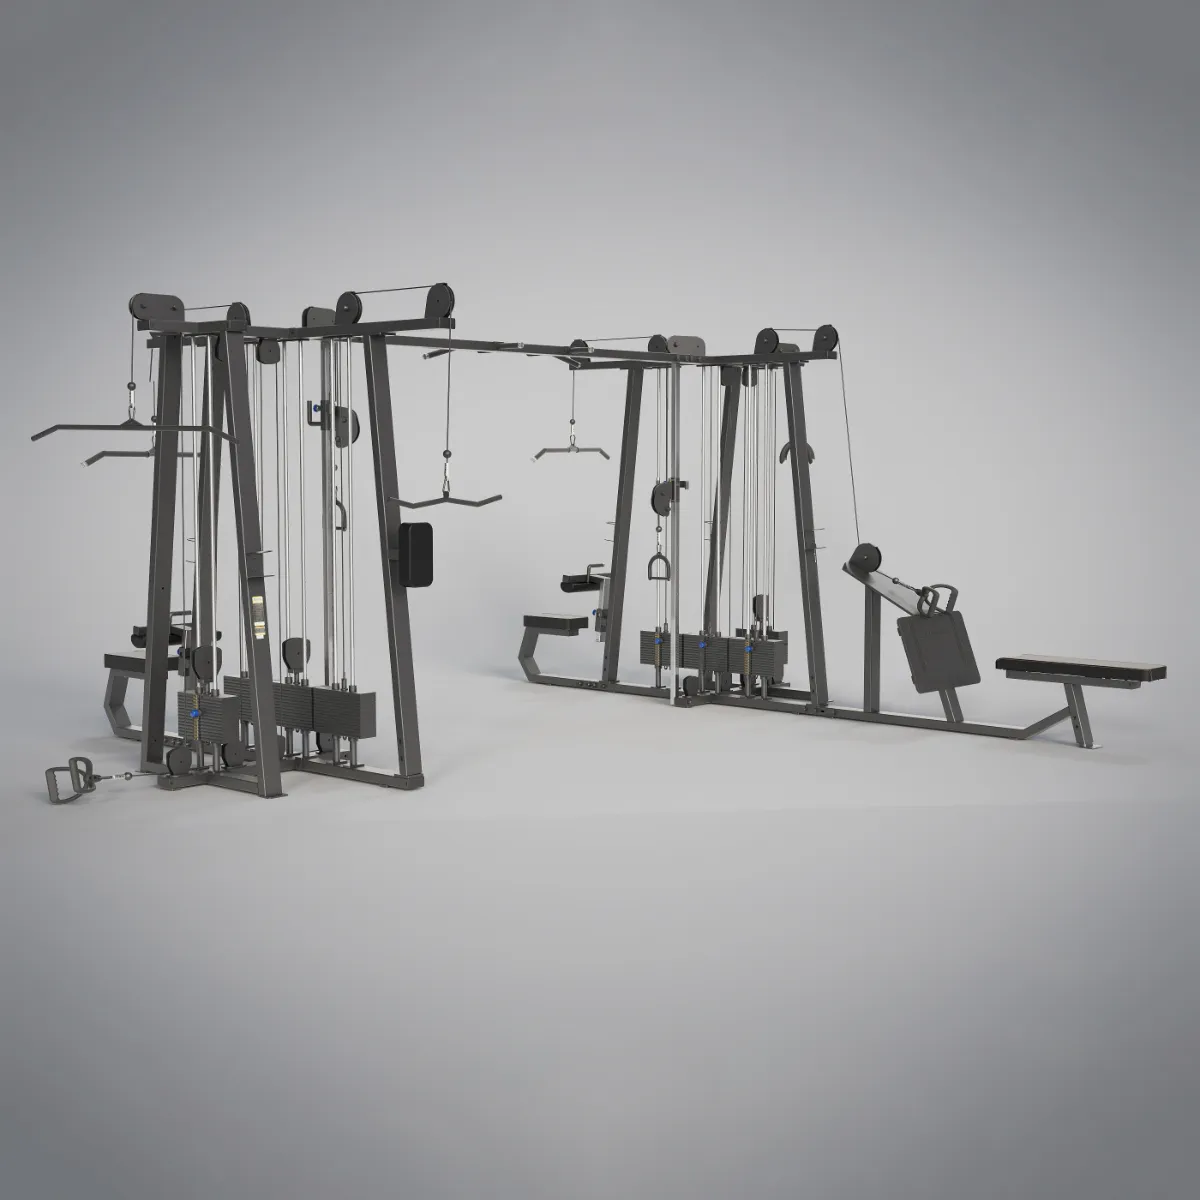 The Rack Workout Station Multi Power Smith Machine Attachment Wall Mount Cable German Fitness Equipment Gym Sets With Leg Press